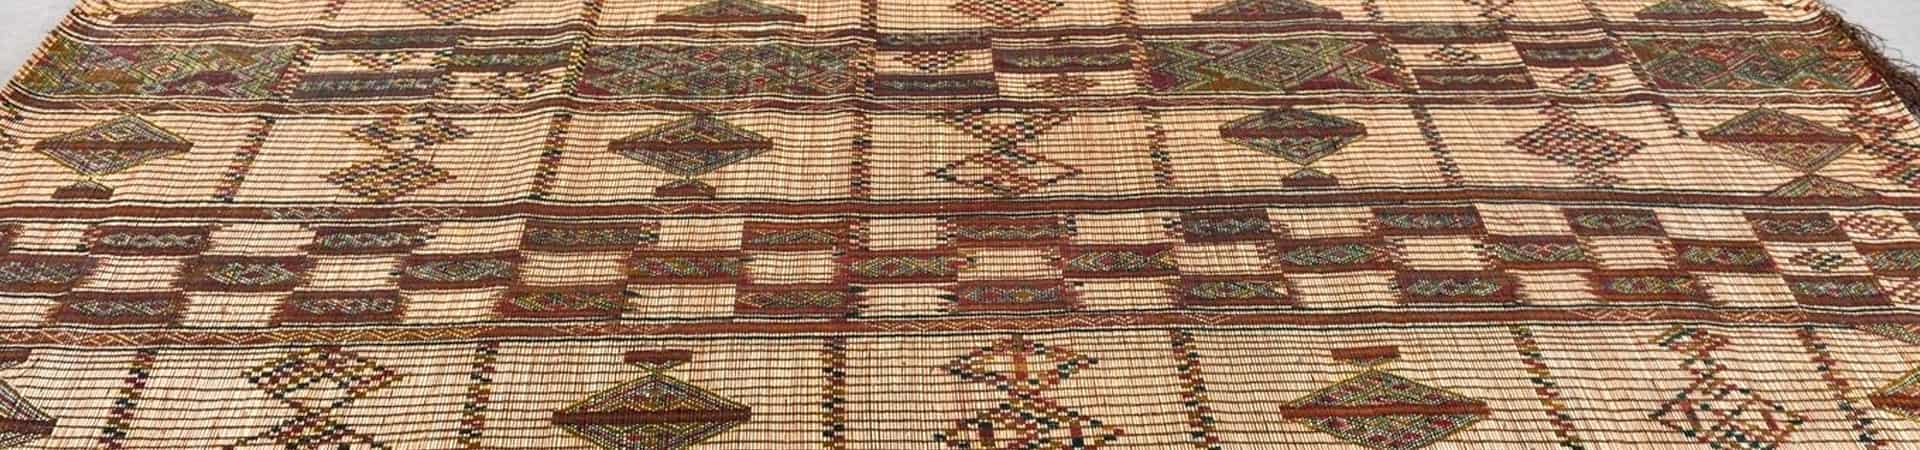 Mauritanian mats on Palm fibers and leather straps